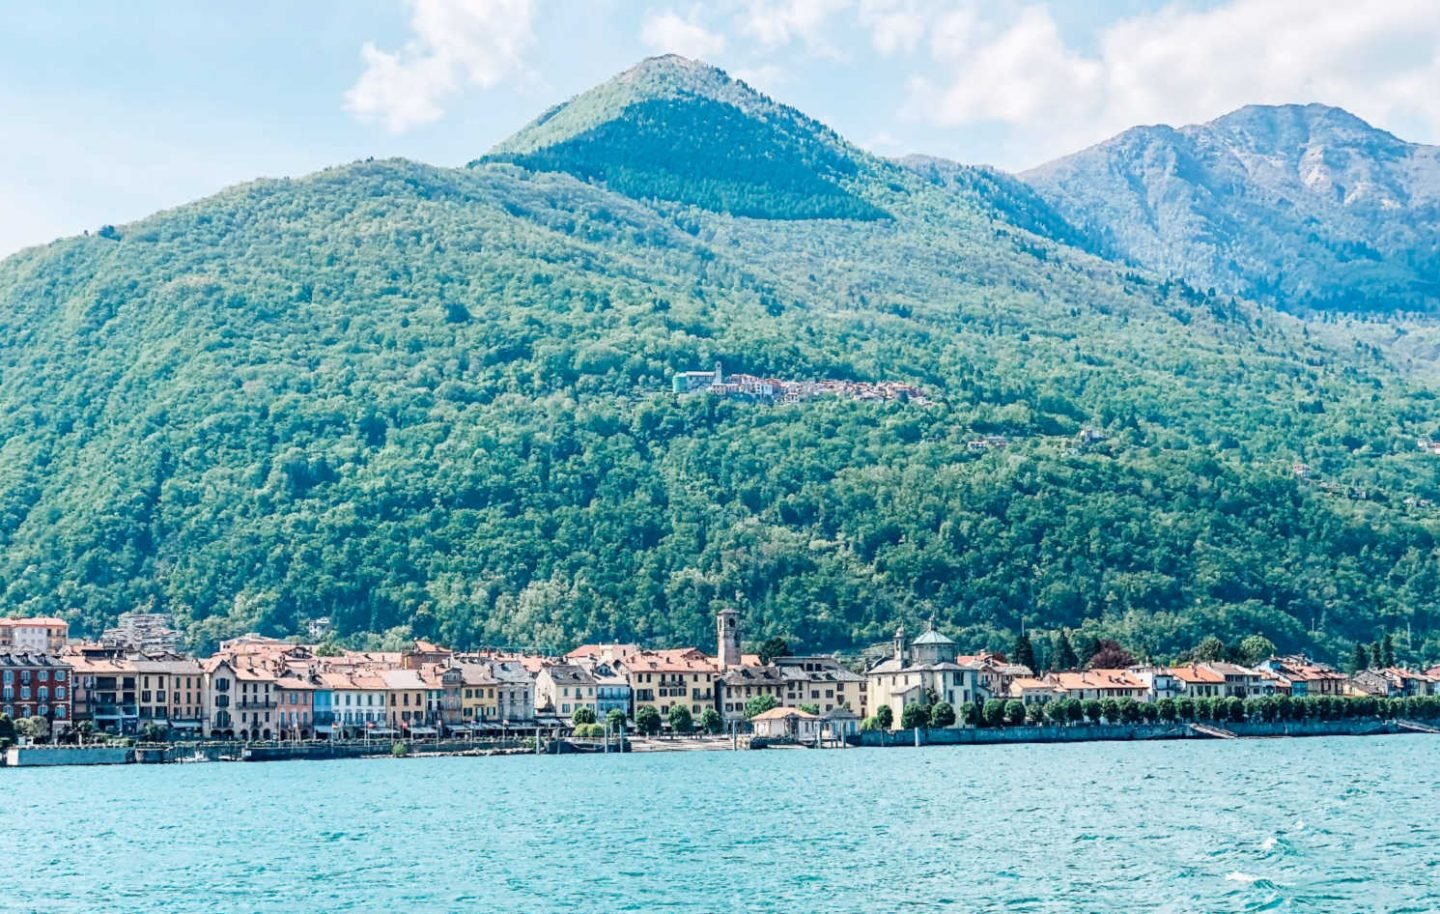 A view of Cannobio On Lake Maggiore from the water